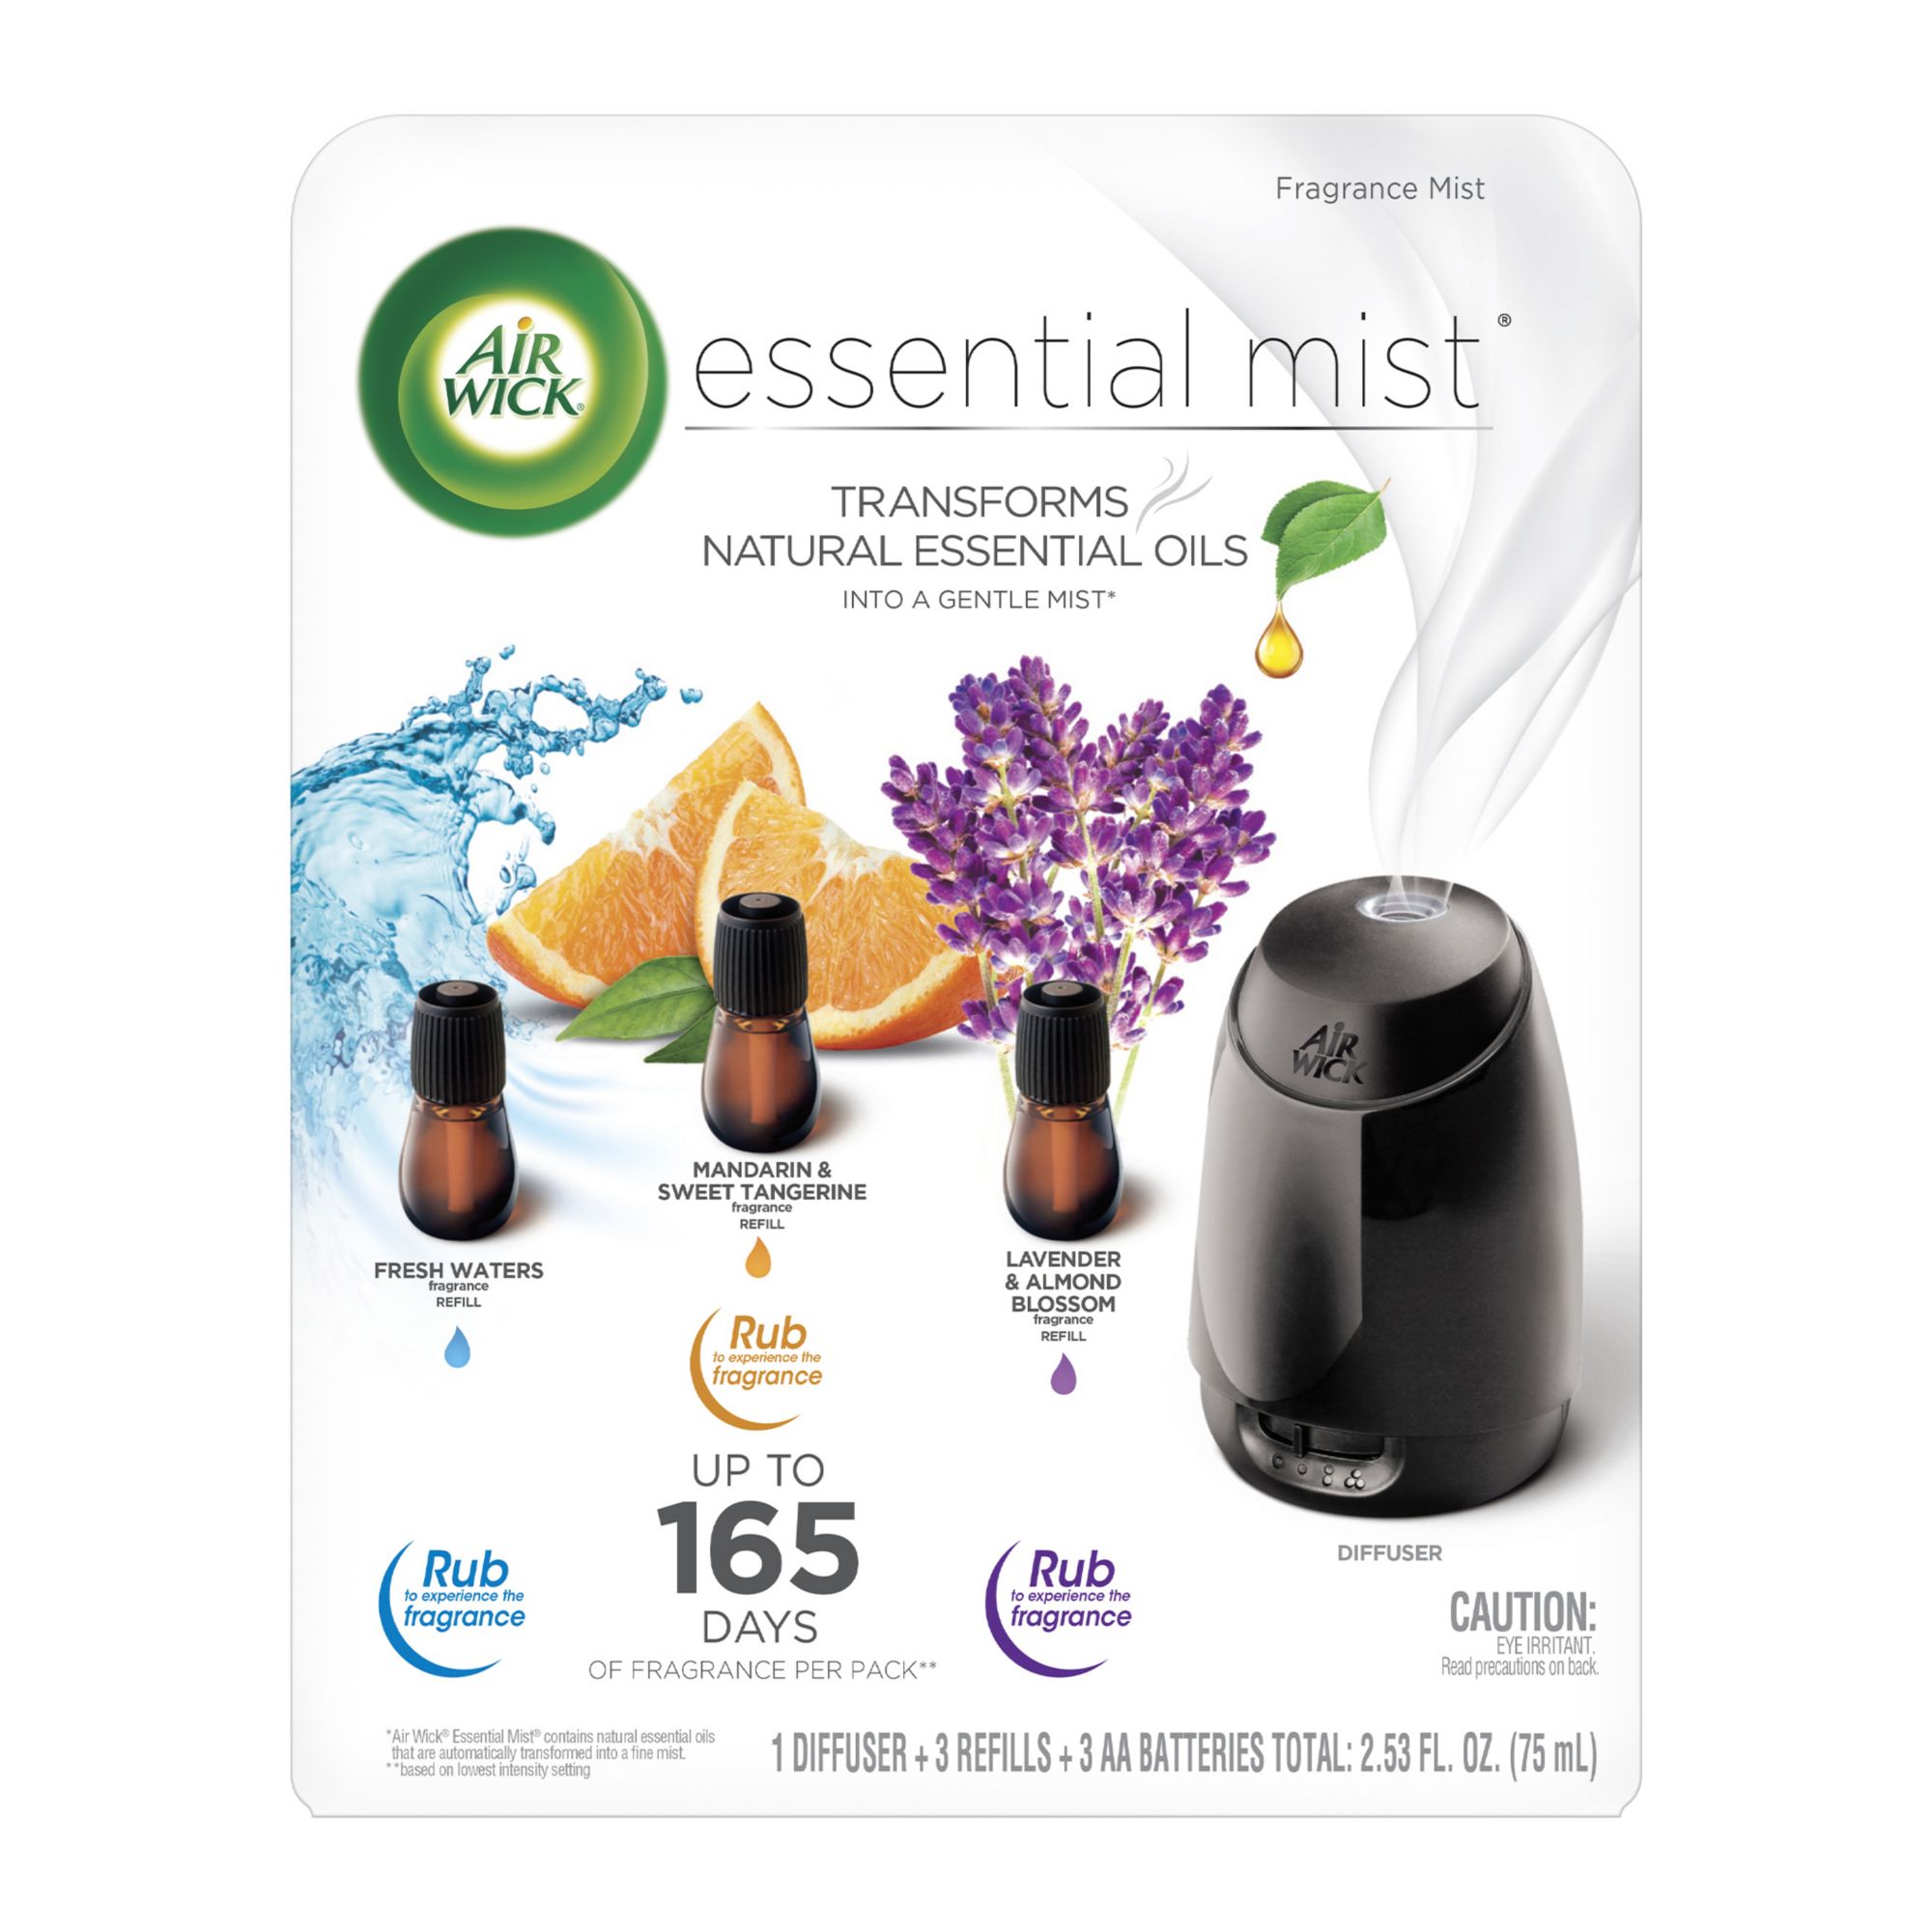 How to Use: Air Wick Essential Mist 